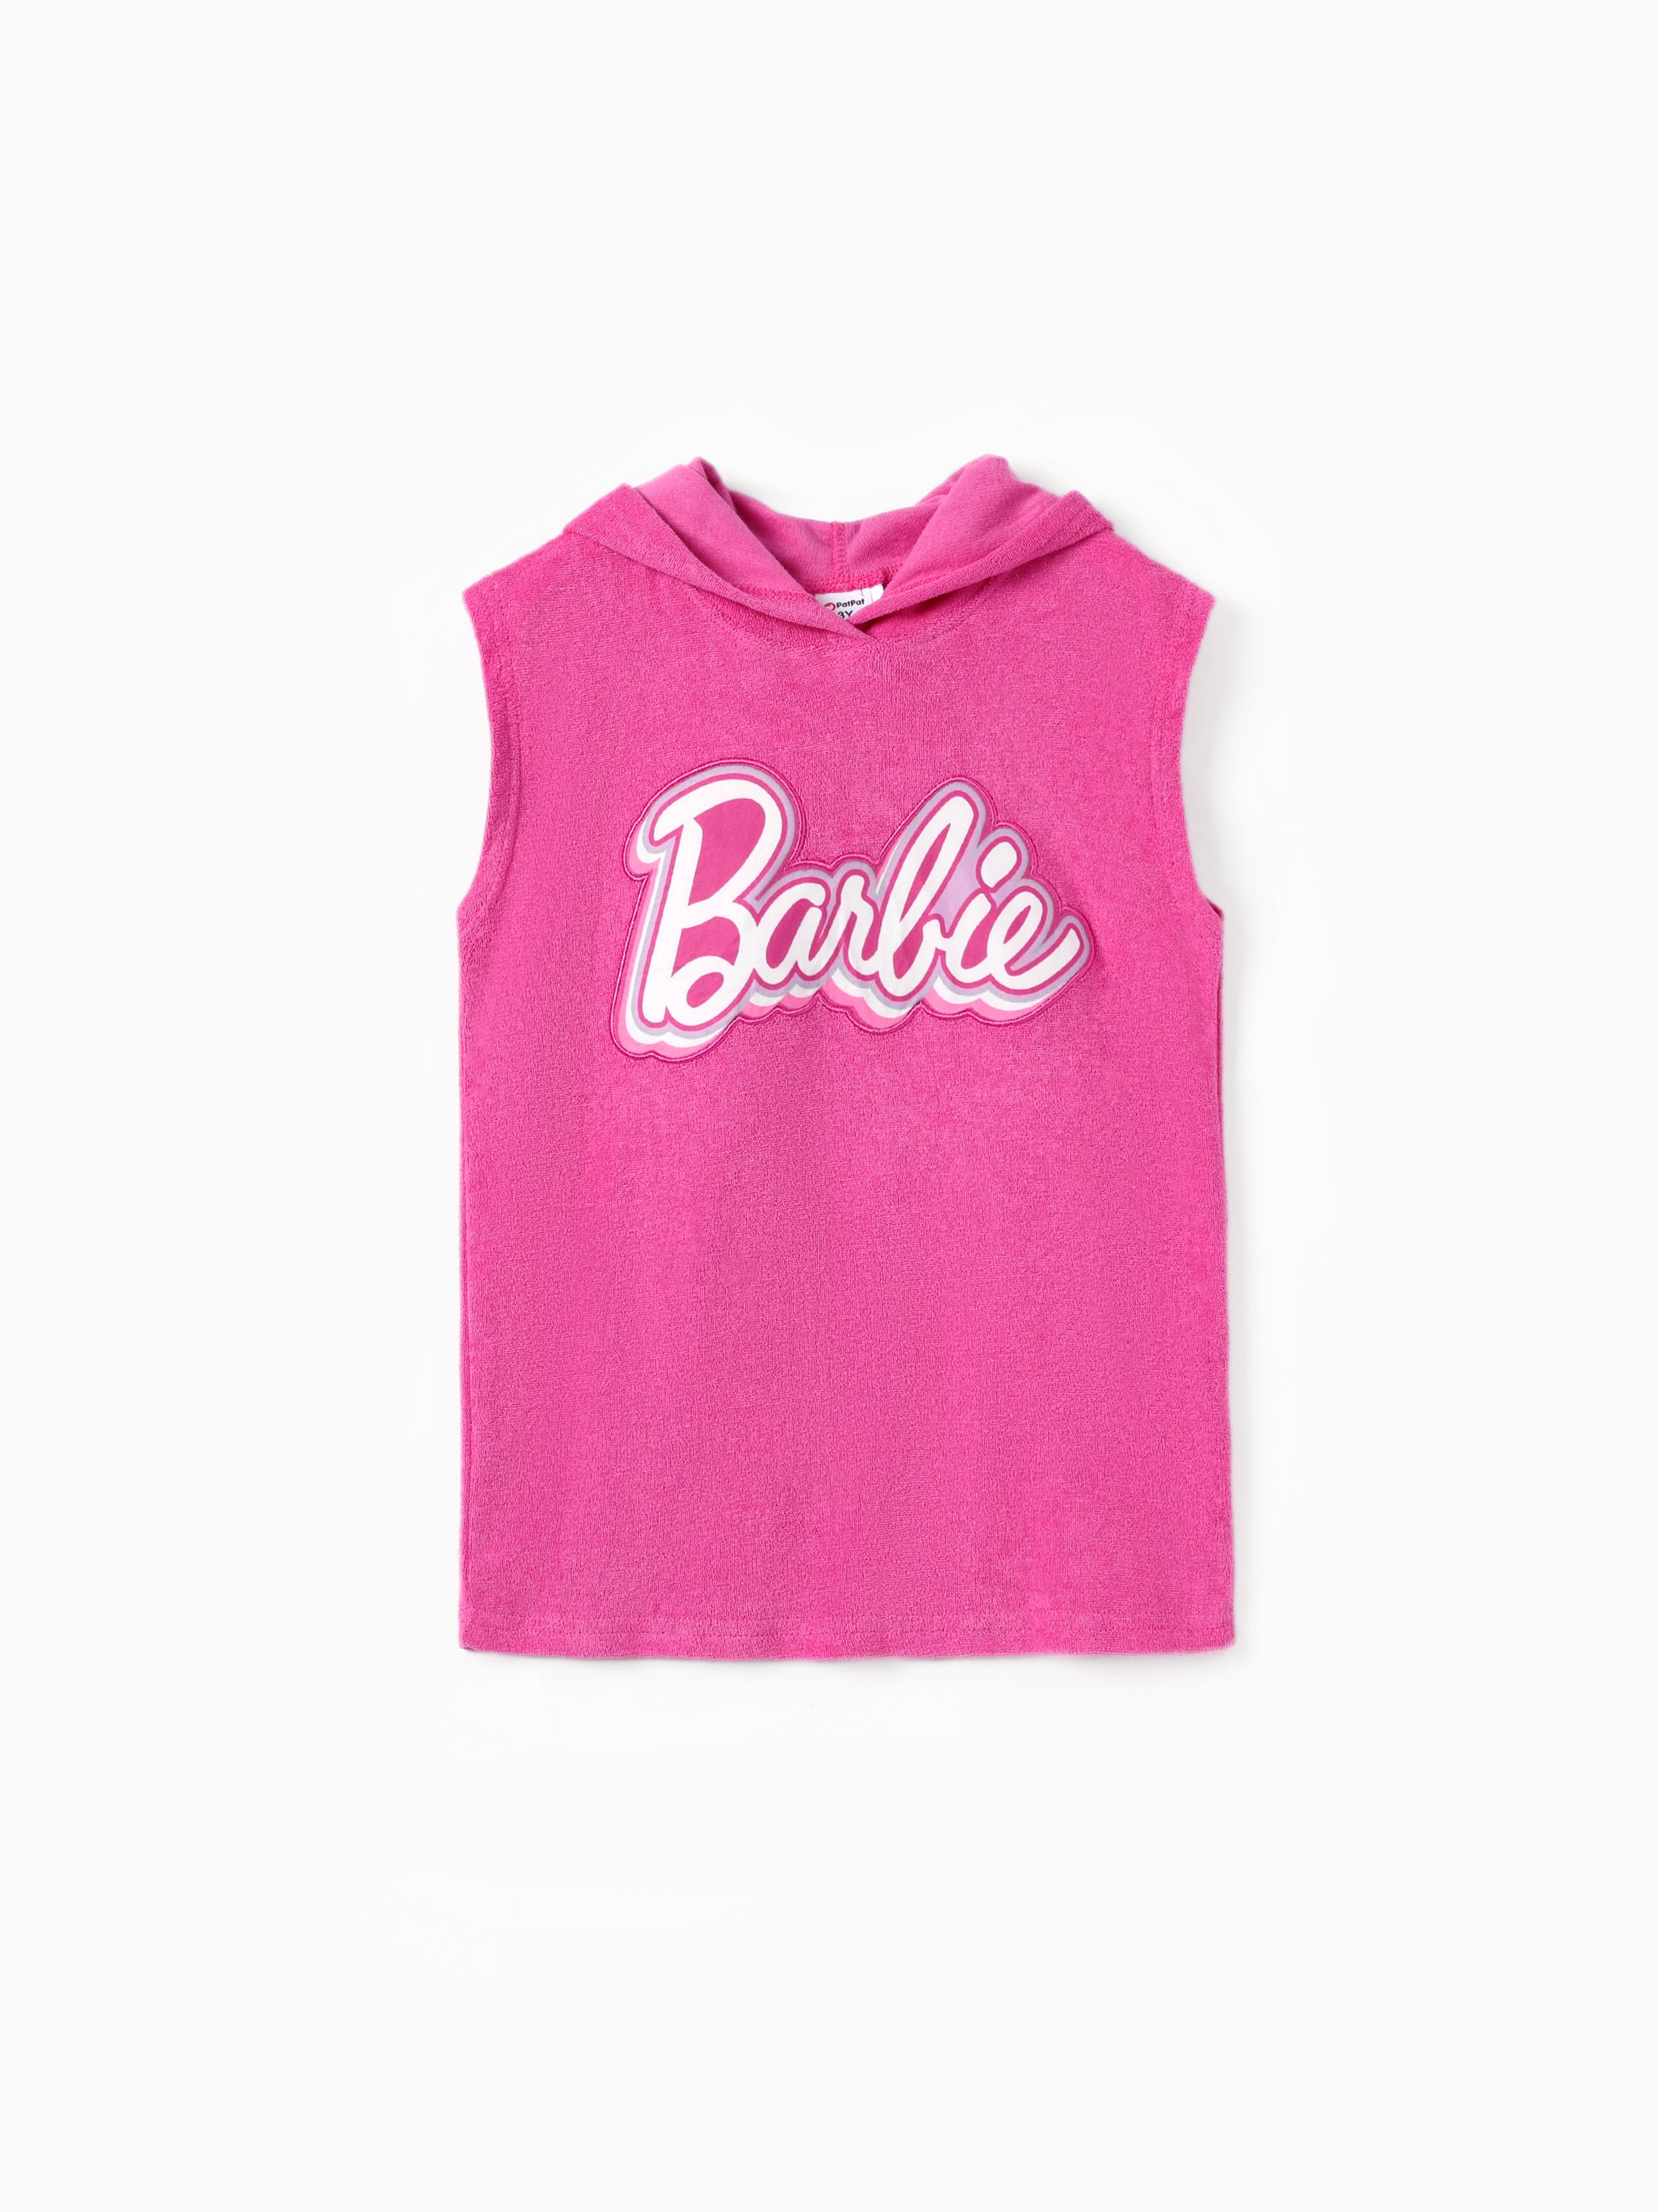 

Barbie Toddler/Kids Girls 1pc Cotton Classic Logo Print Hooded Towel/Swimsuit Coverup